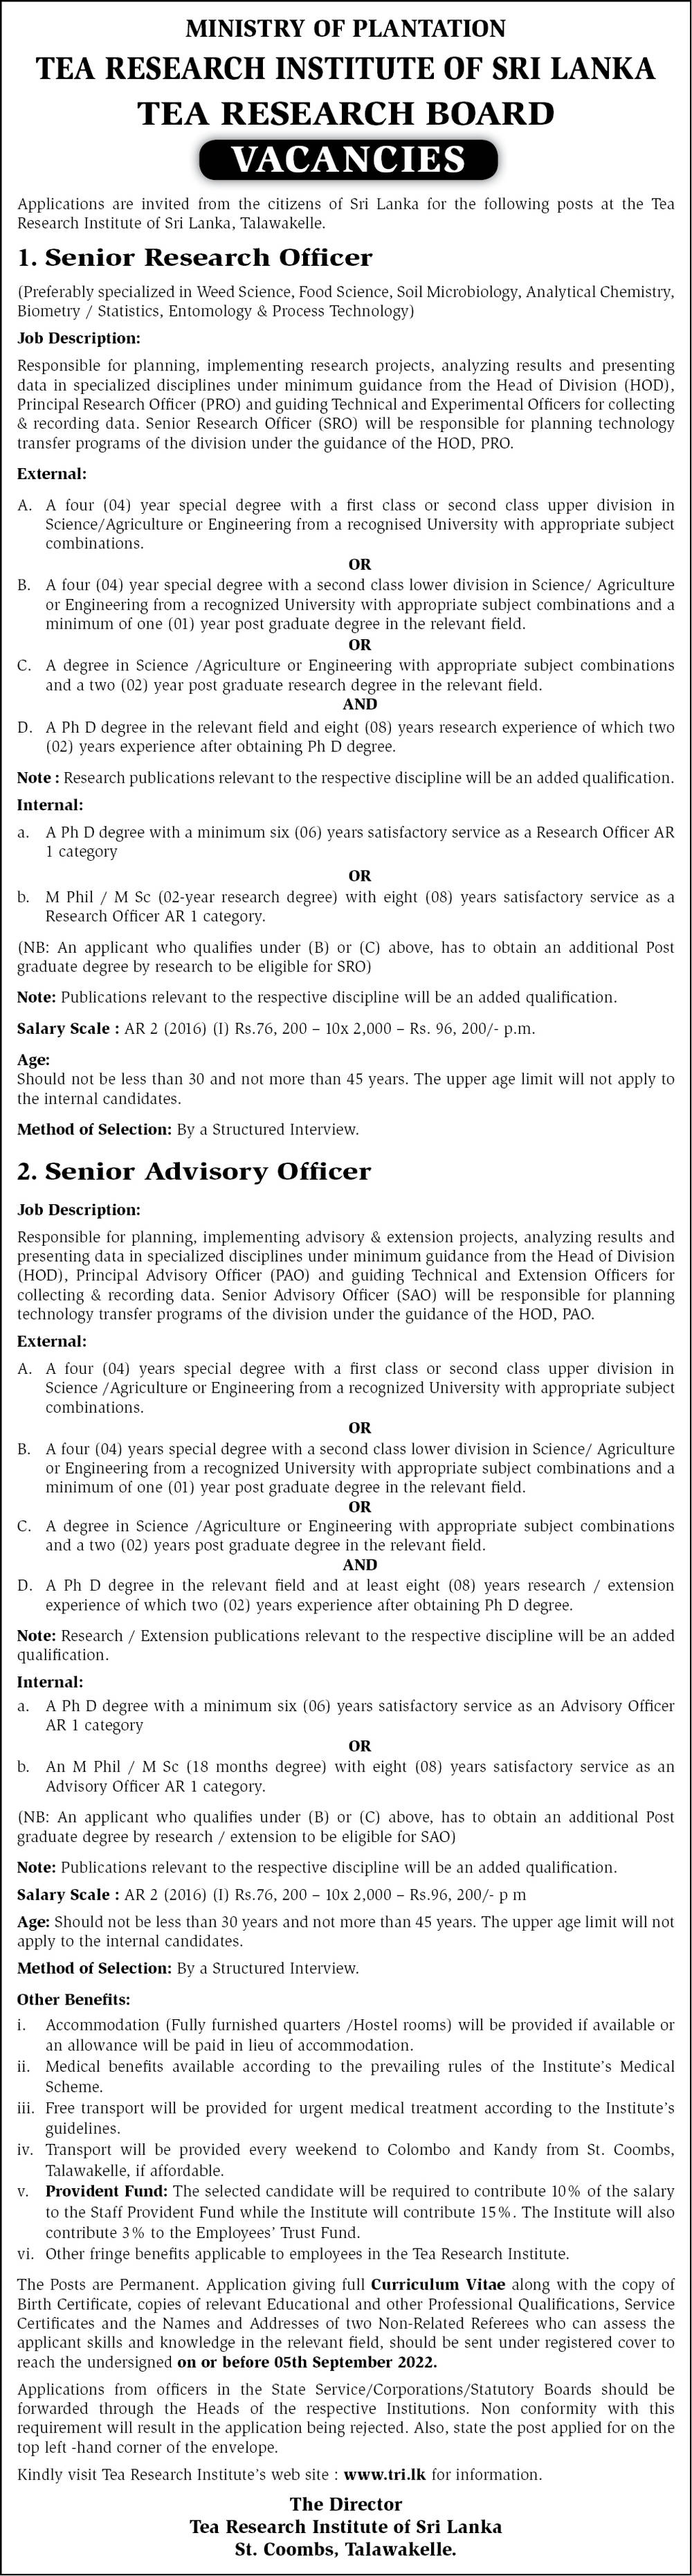 You are currently viewing Senior Research Officer / Senior Advisory Officer